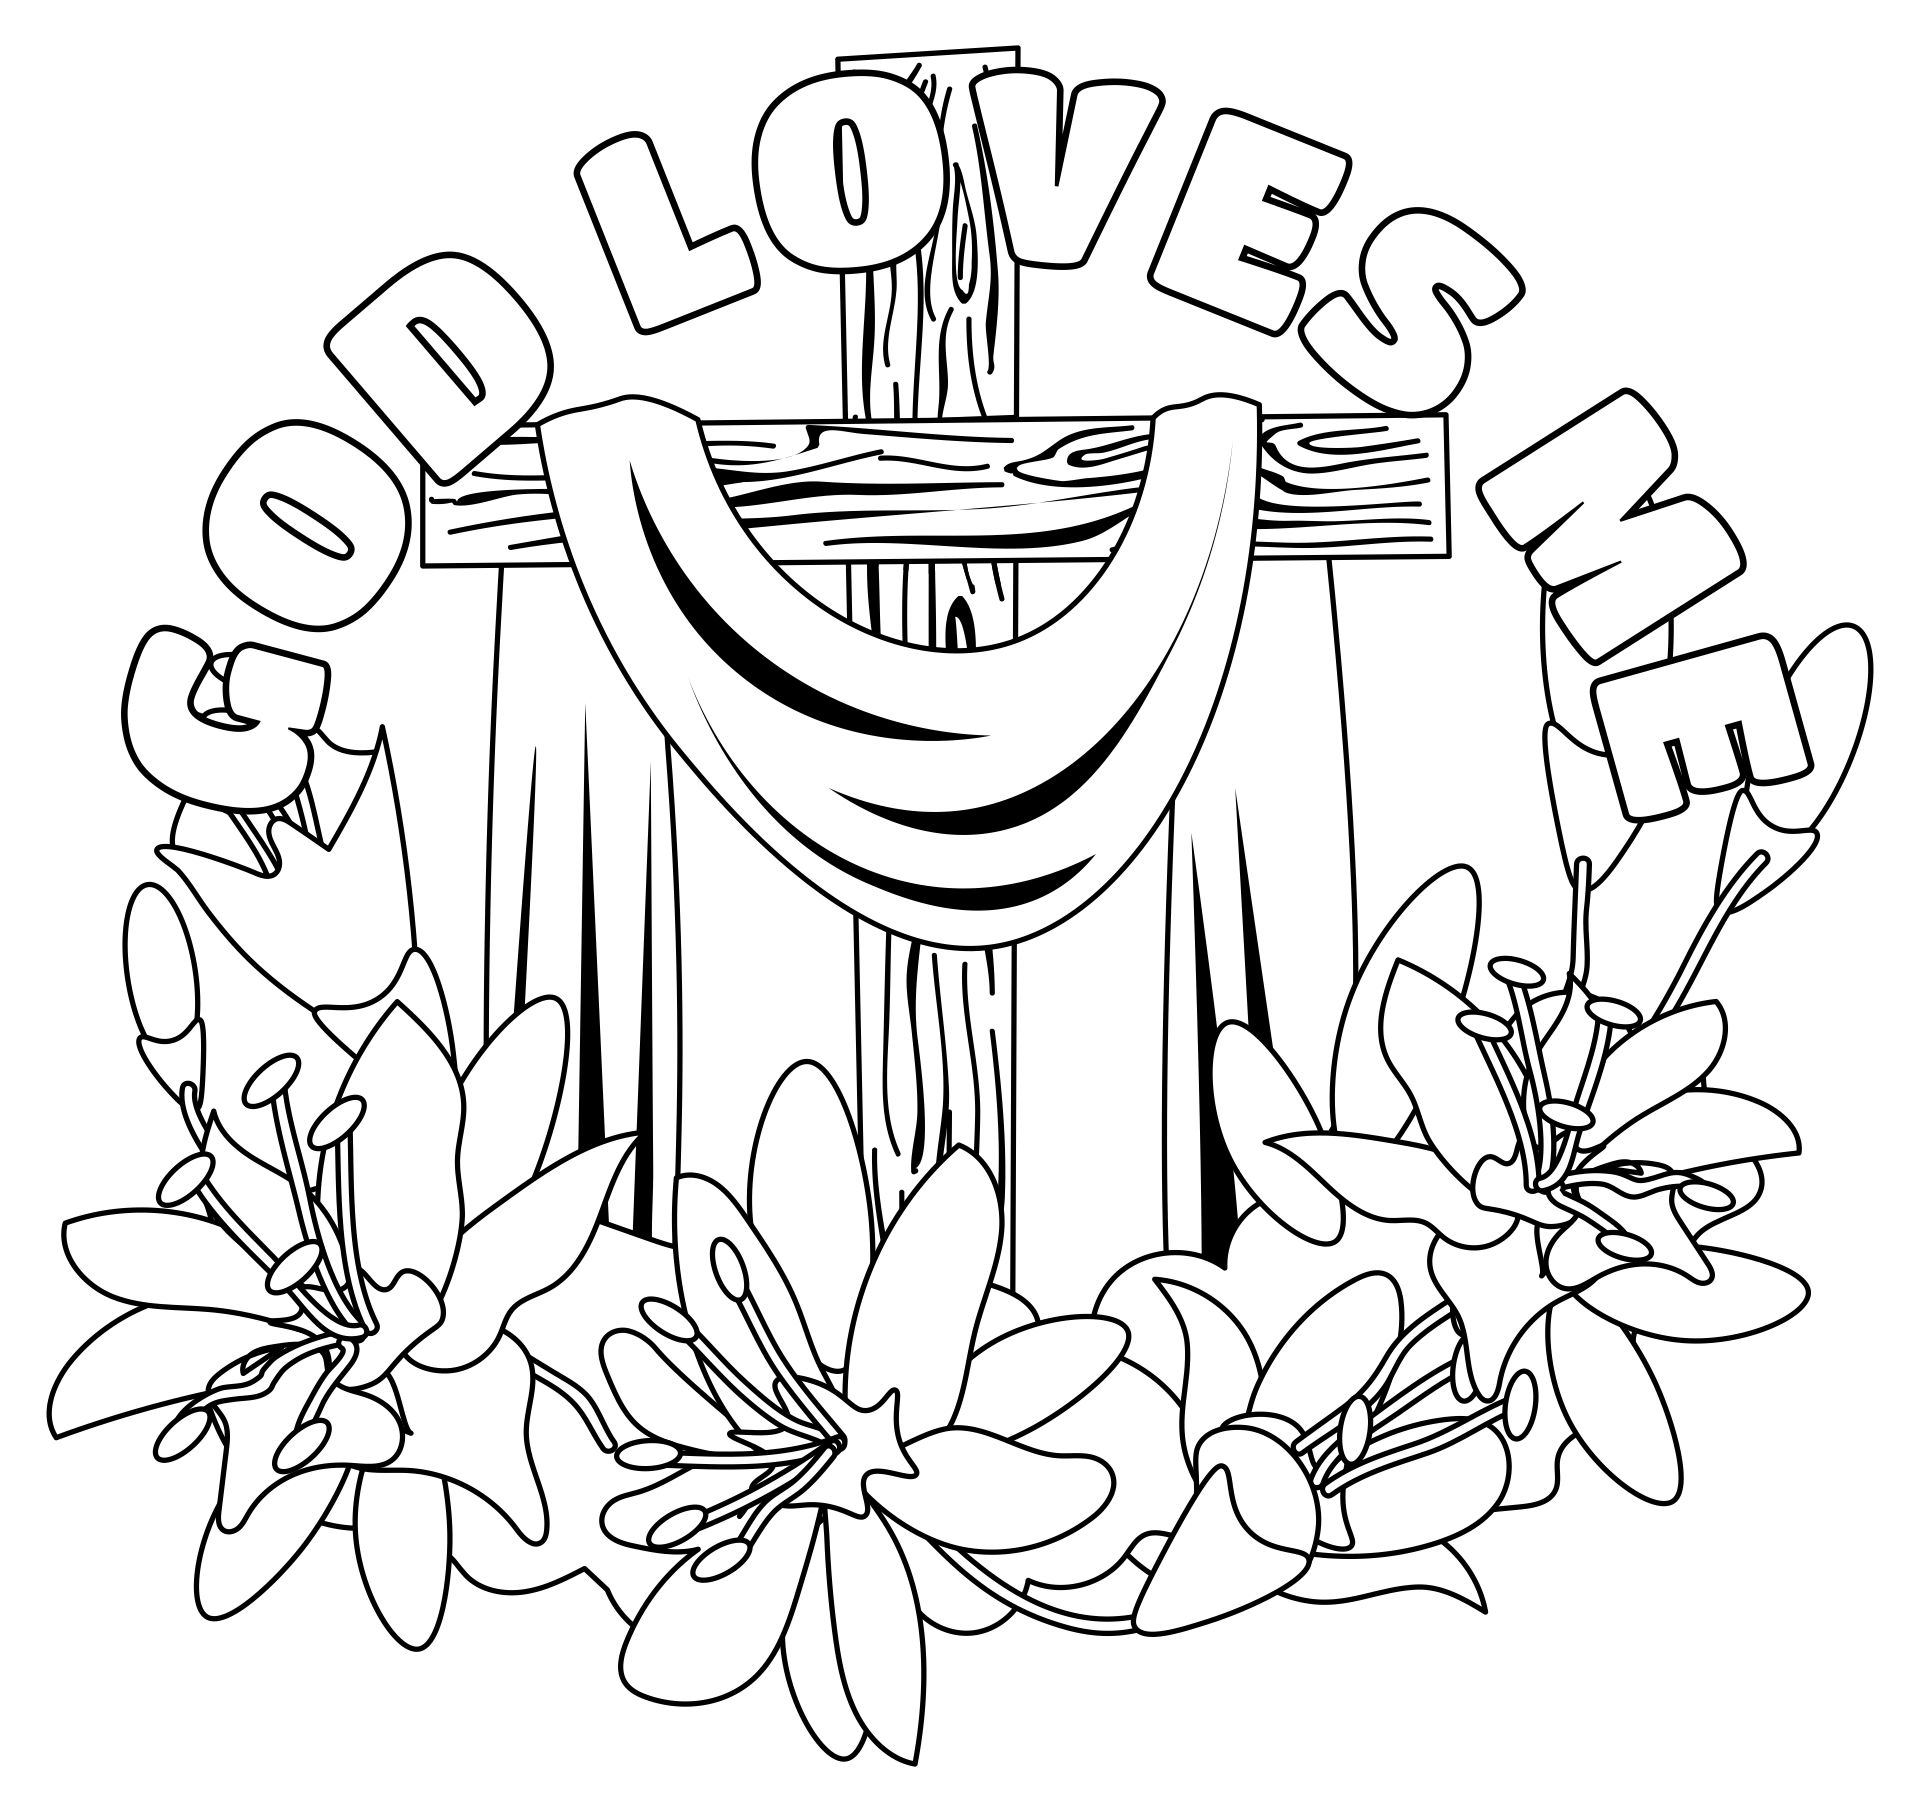 colouring-pages-jesus-loves-me-jesus-coloring-pages-coloring-home-printable-jesus-loves-me